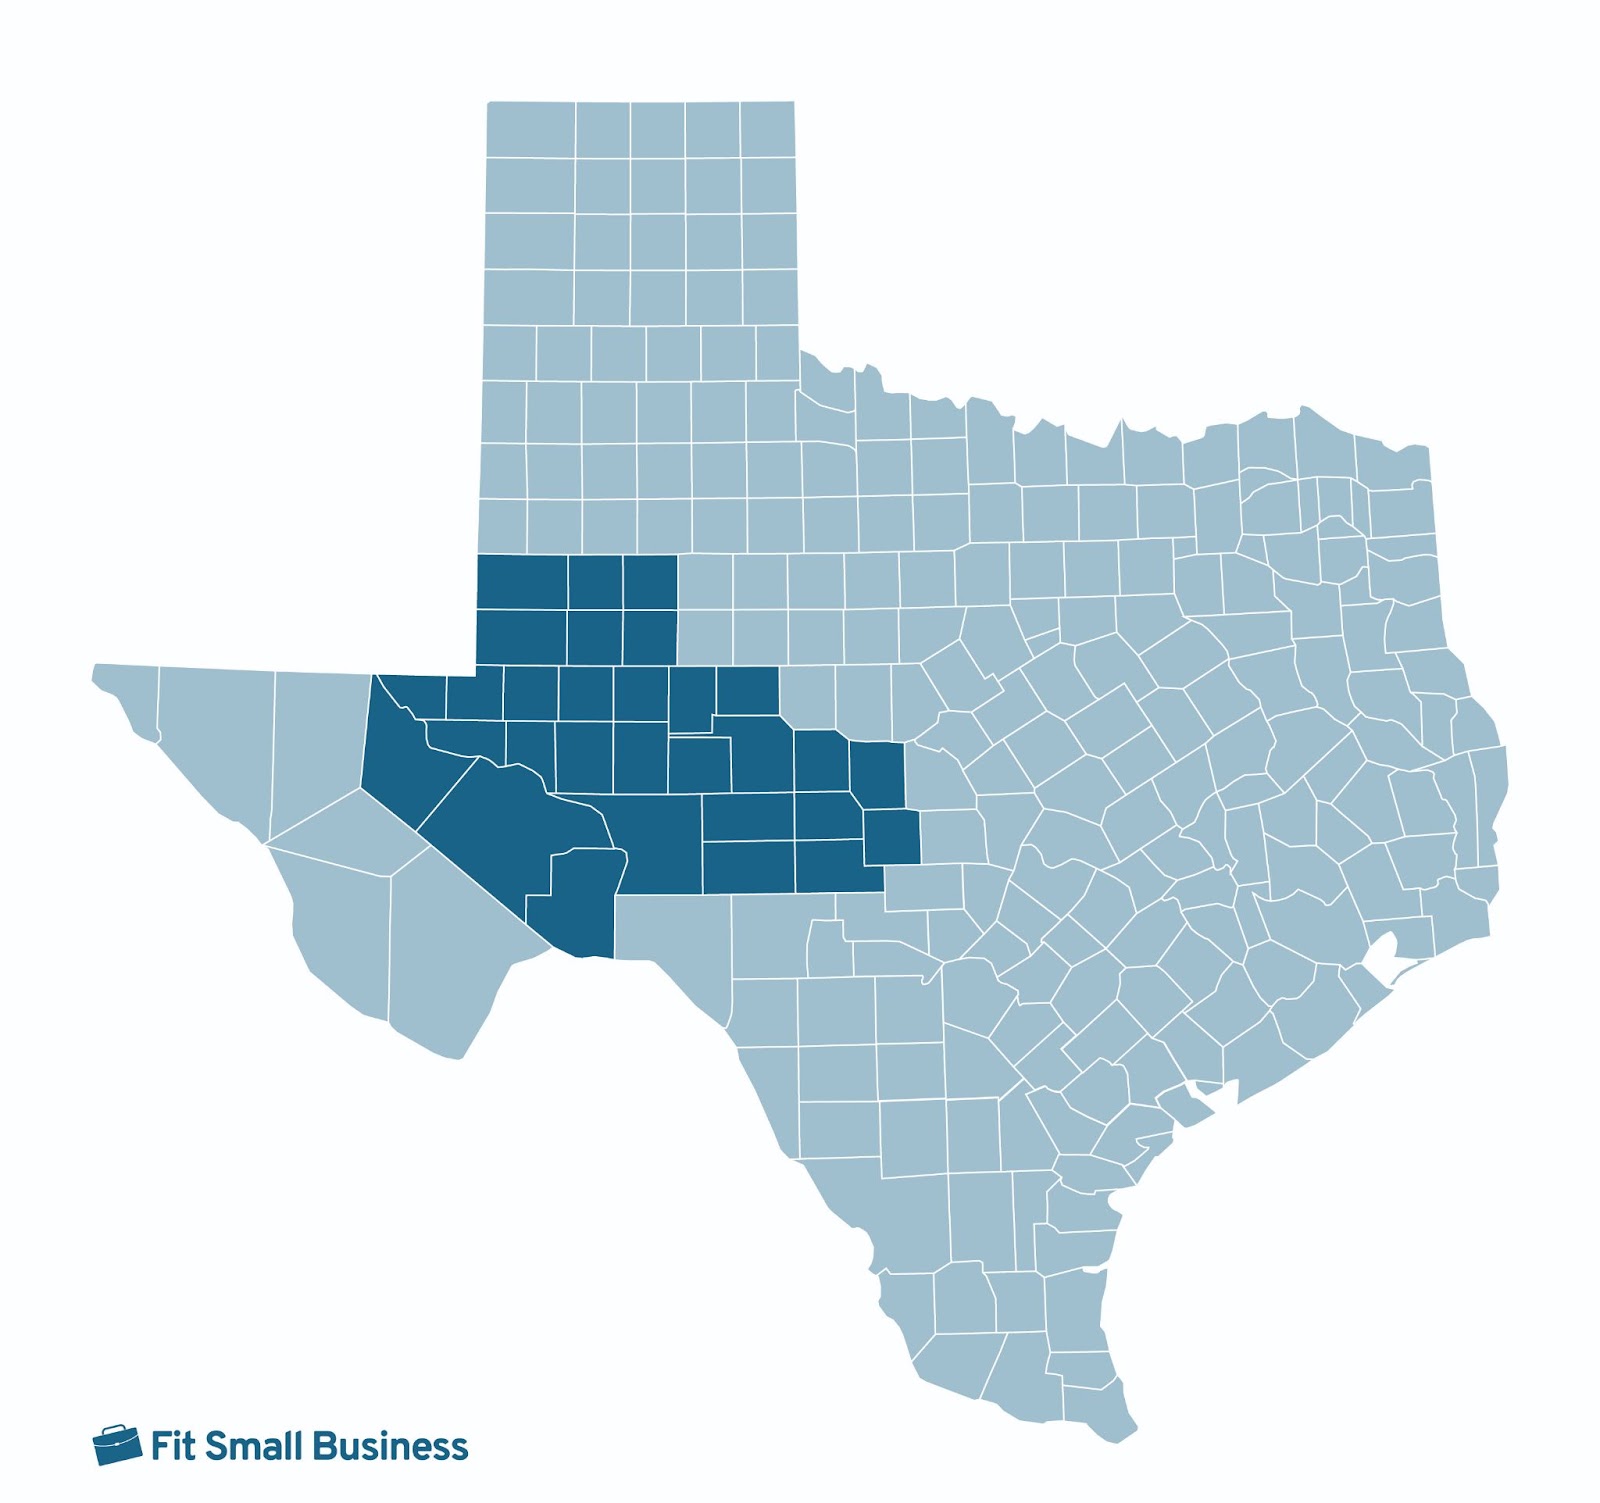 Other Business Banks in West Texas.